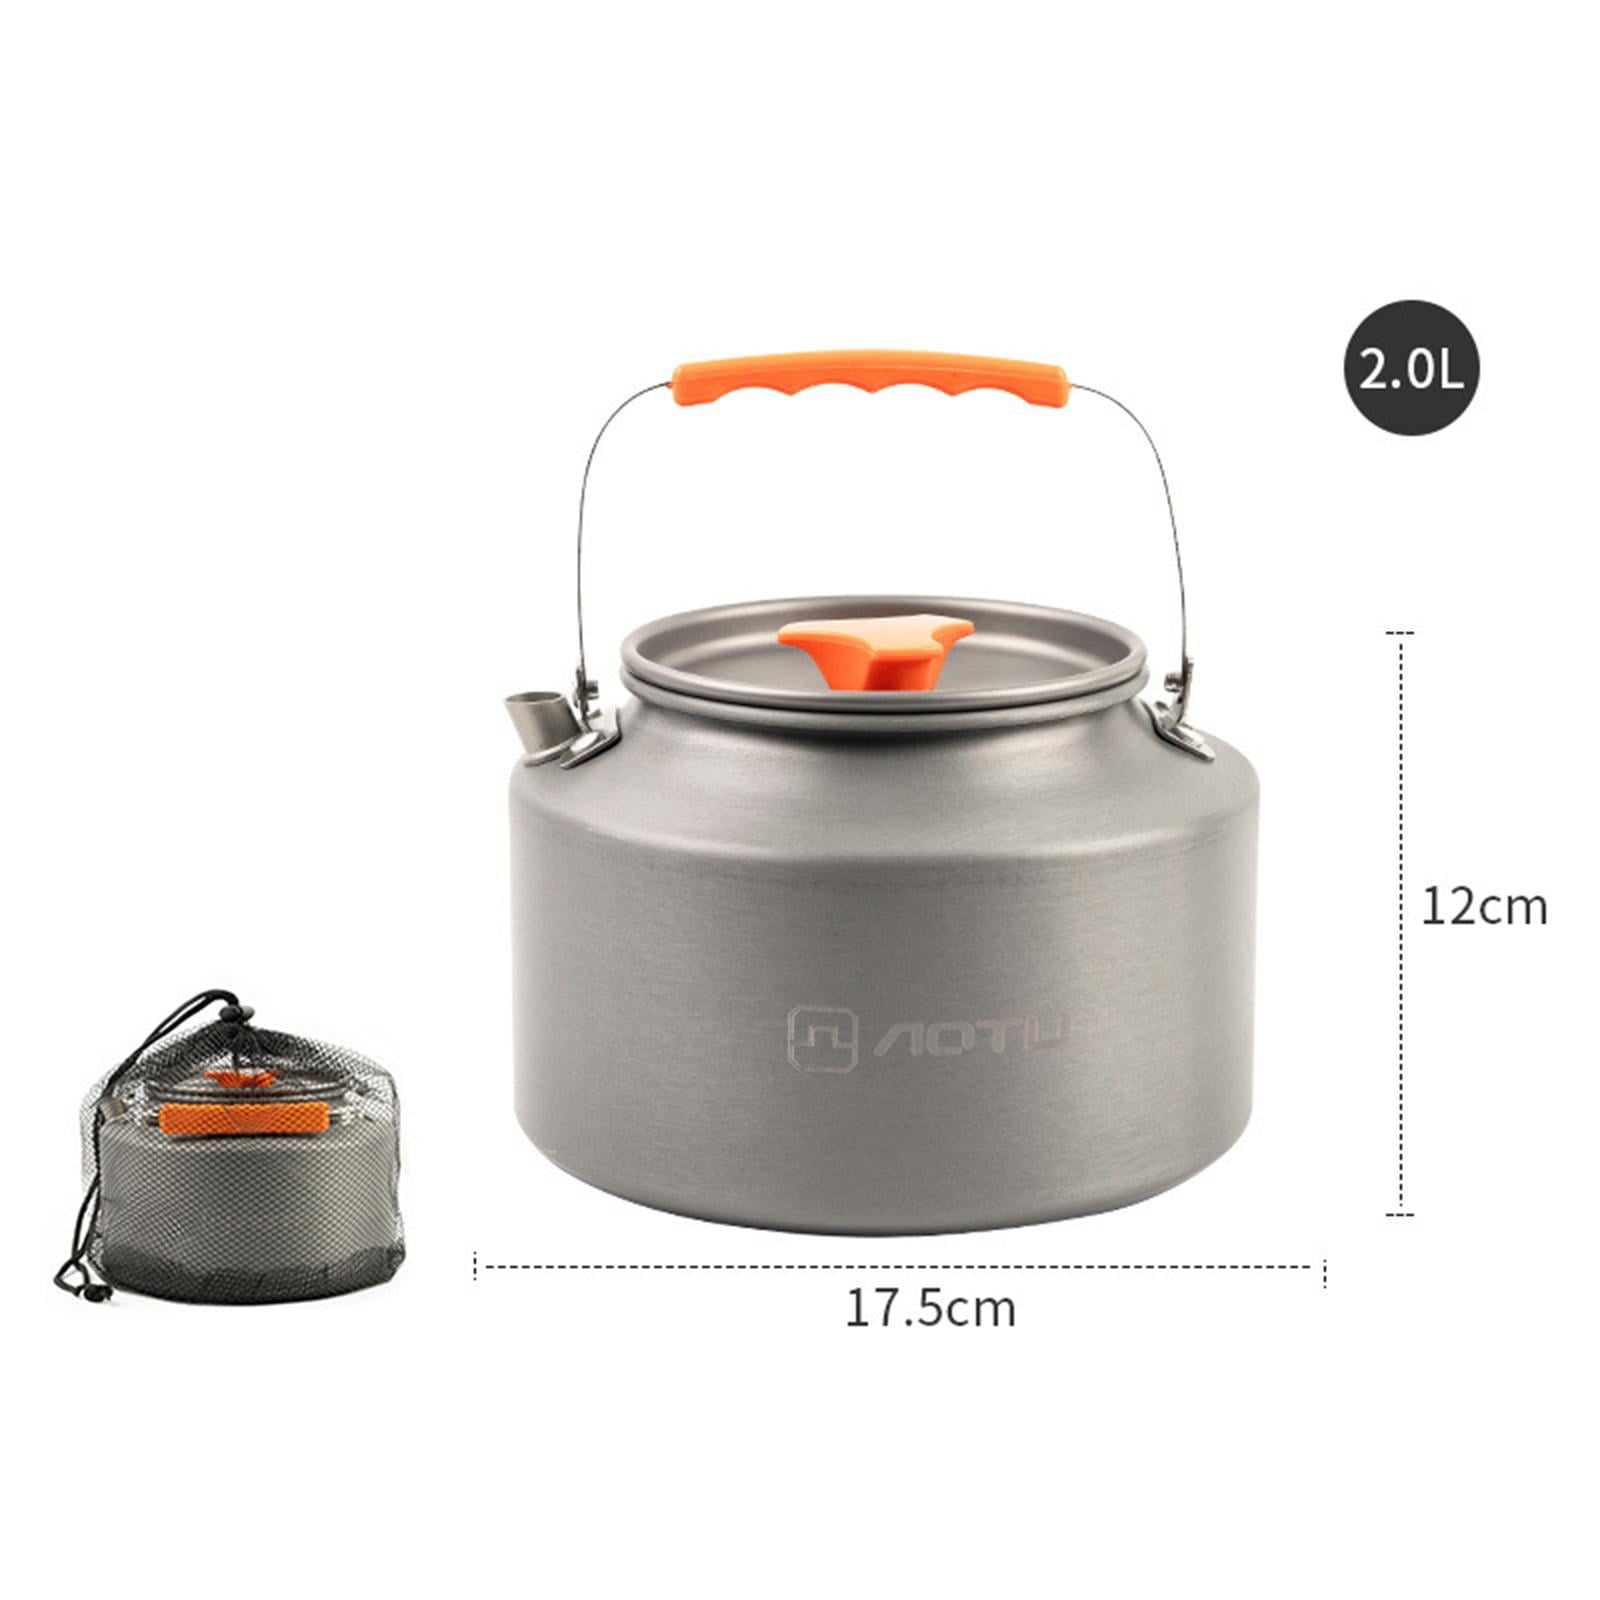 Odoland 4L Camping Kettle Set with 4 Cups Durable Stainless Steel Camp Tea Coffee Water Pot with 4 Mugs for Hiking Backpacking Outdoor Camping and Pi